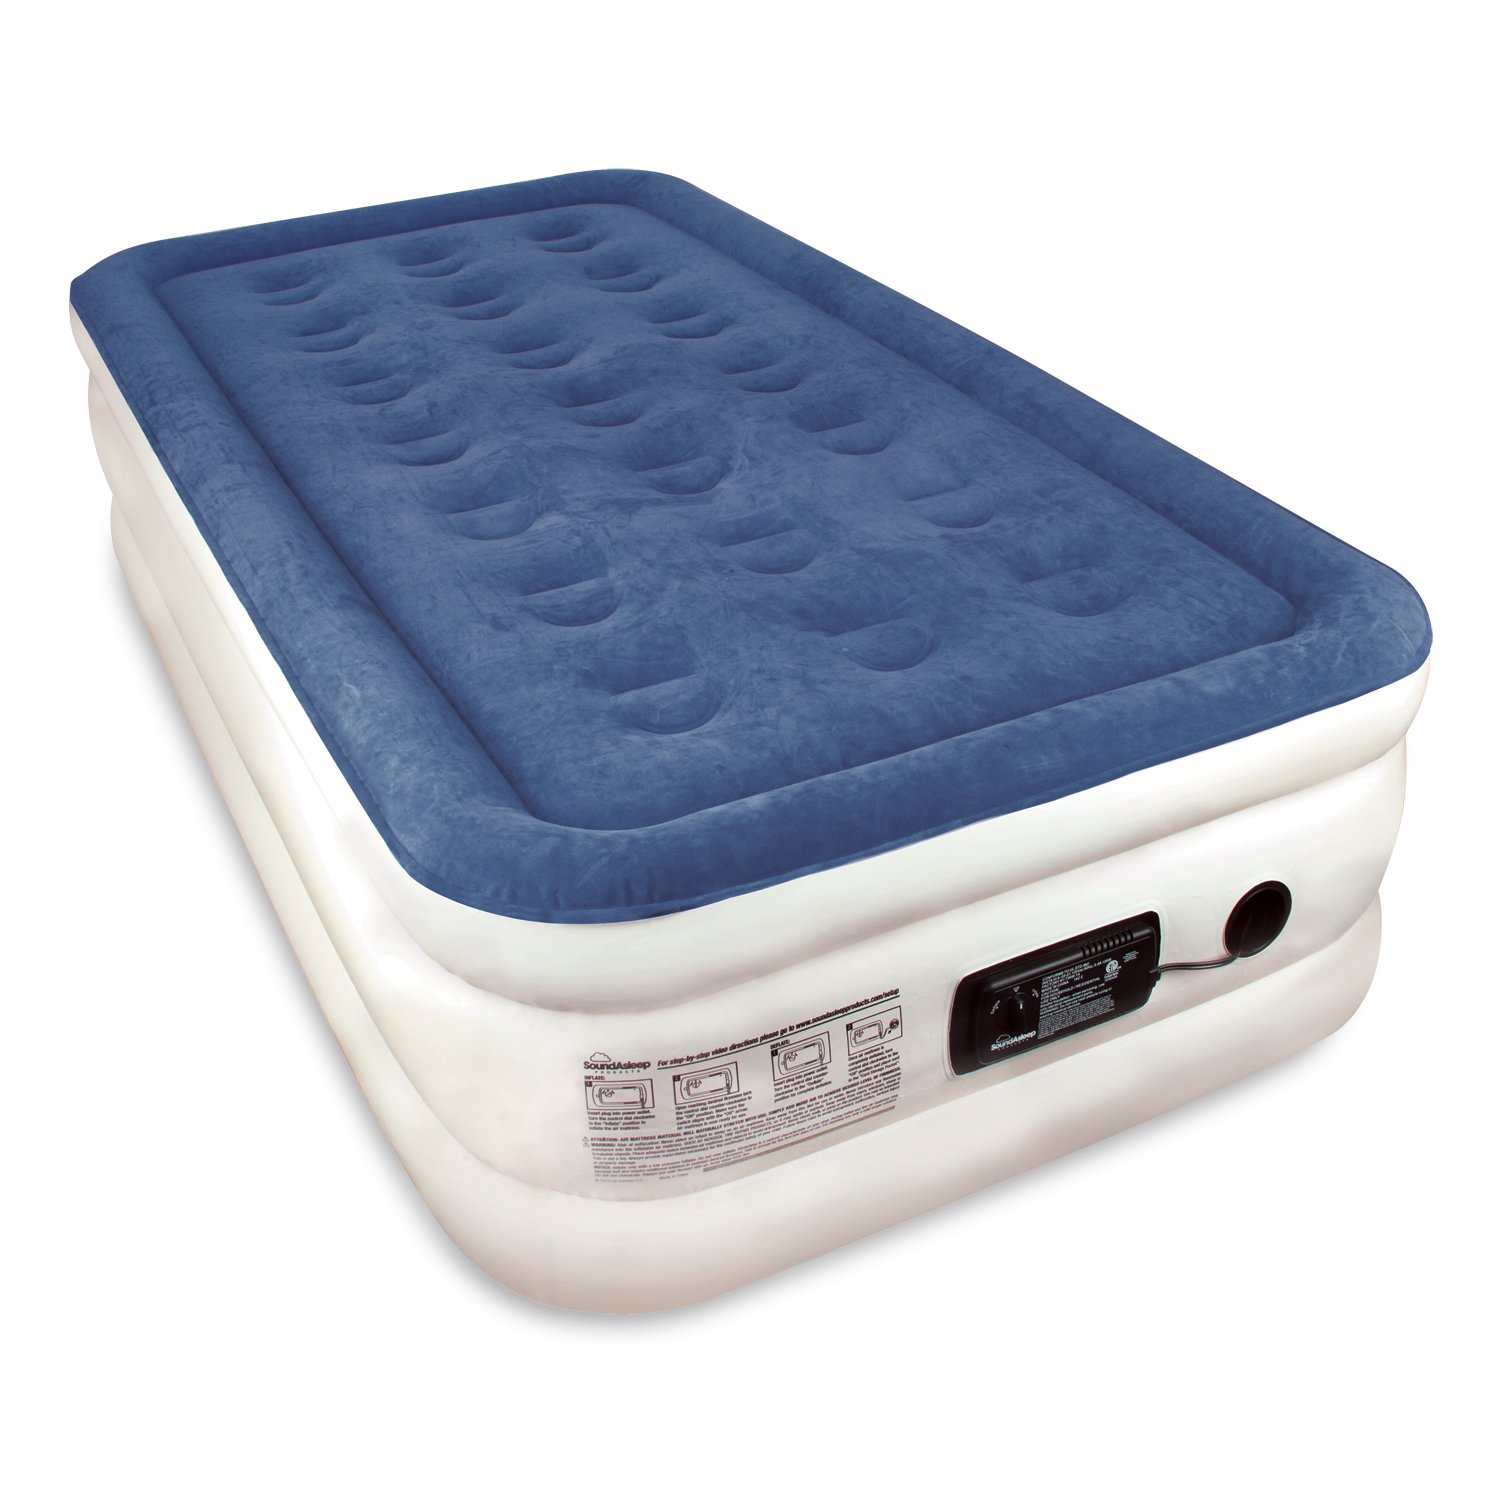 Book Cover SoundAsleep Raised Twin Size Premium Air Mattress - Best Inflatable Airbed with Plush Top and Internal High Capacity Pump - Exclusively with ComfortCoil Technology & No Hassle 1-Year Warranty